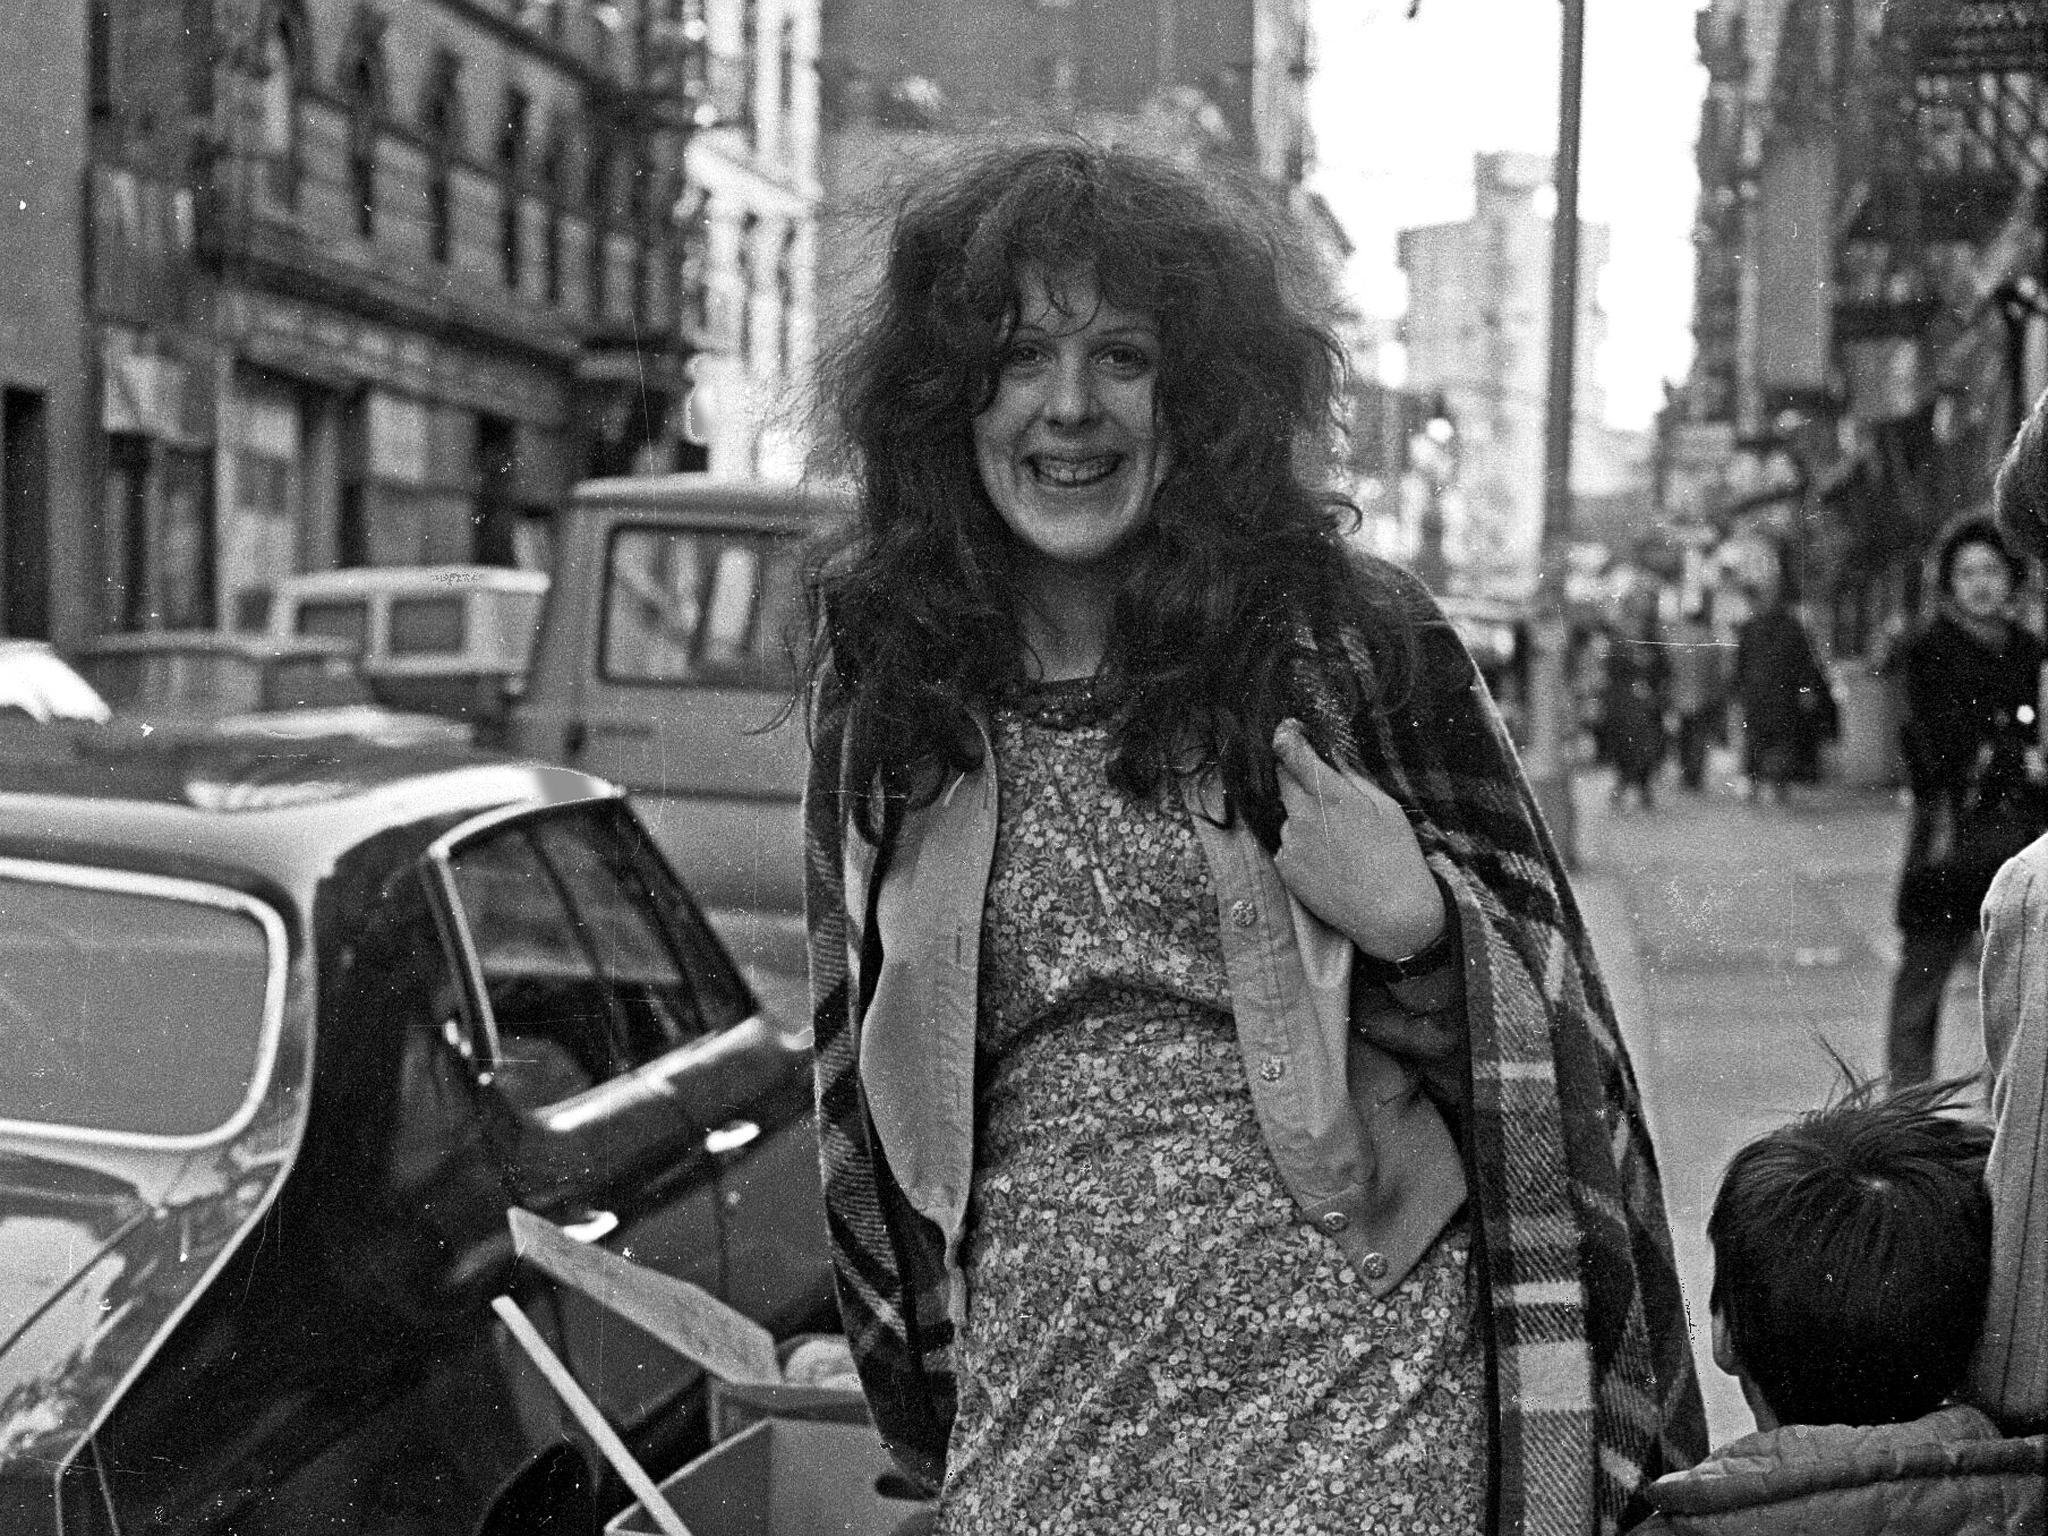 The self-confessed ‘card-carrying hippie’ in the Lower East Side of Manhattan, 1973. In her twenties, she supported herself and her son on child welfare payments as well as occasional cheques from freelance writing and secretarial jobs